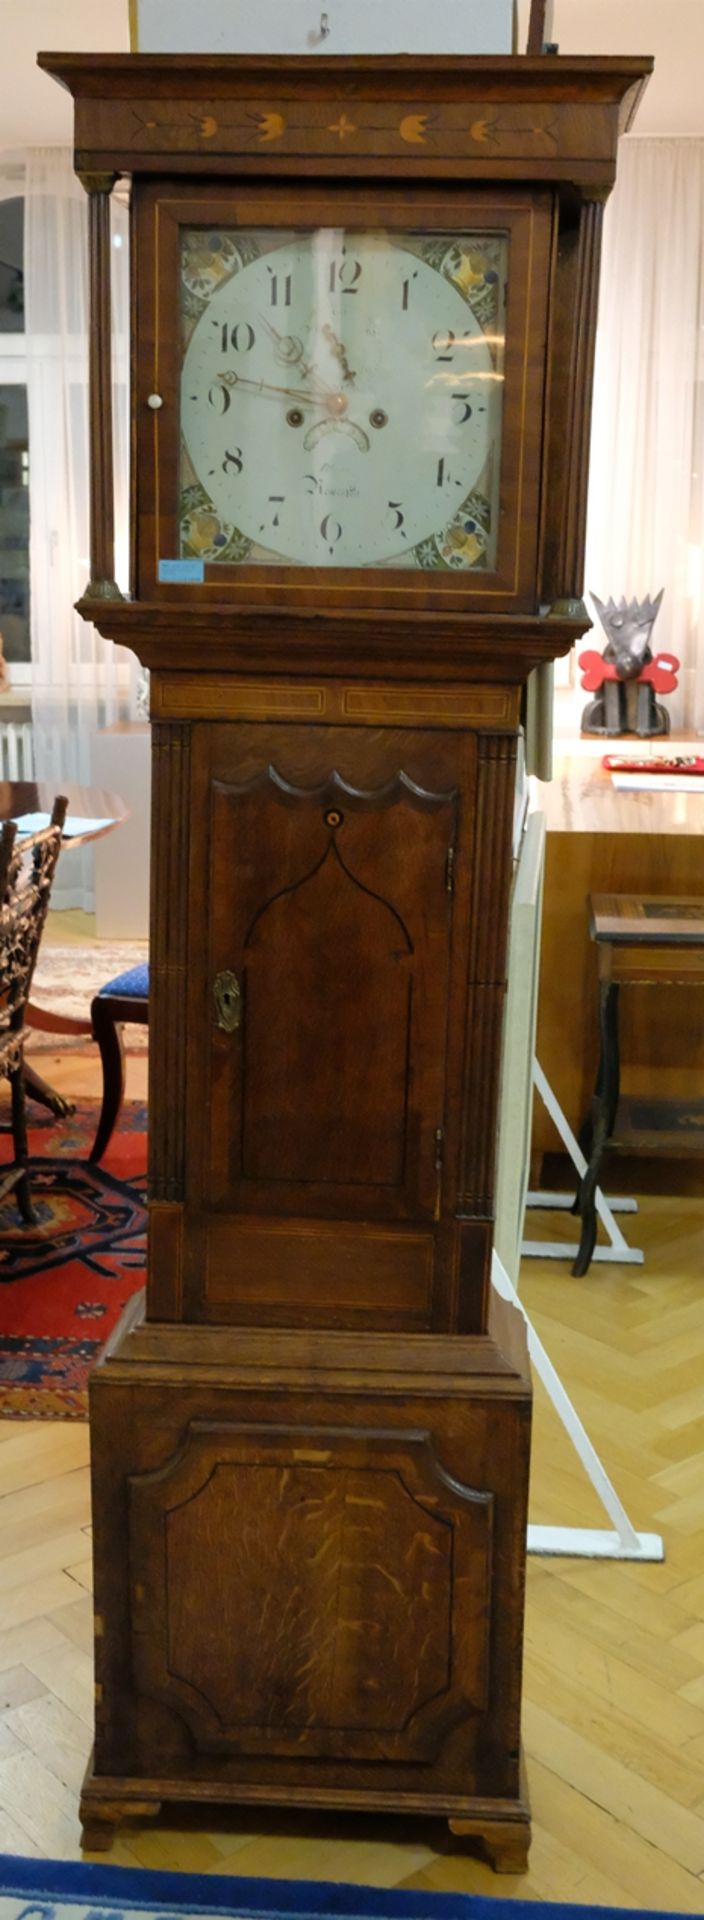 English grandfather clock, around 1840, oak. Rectangular base, overlying centre section with a door